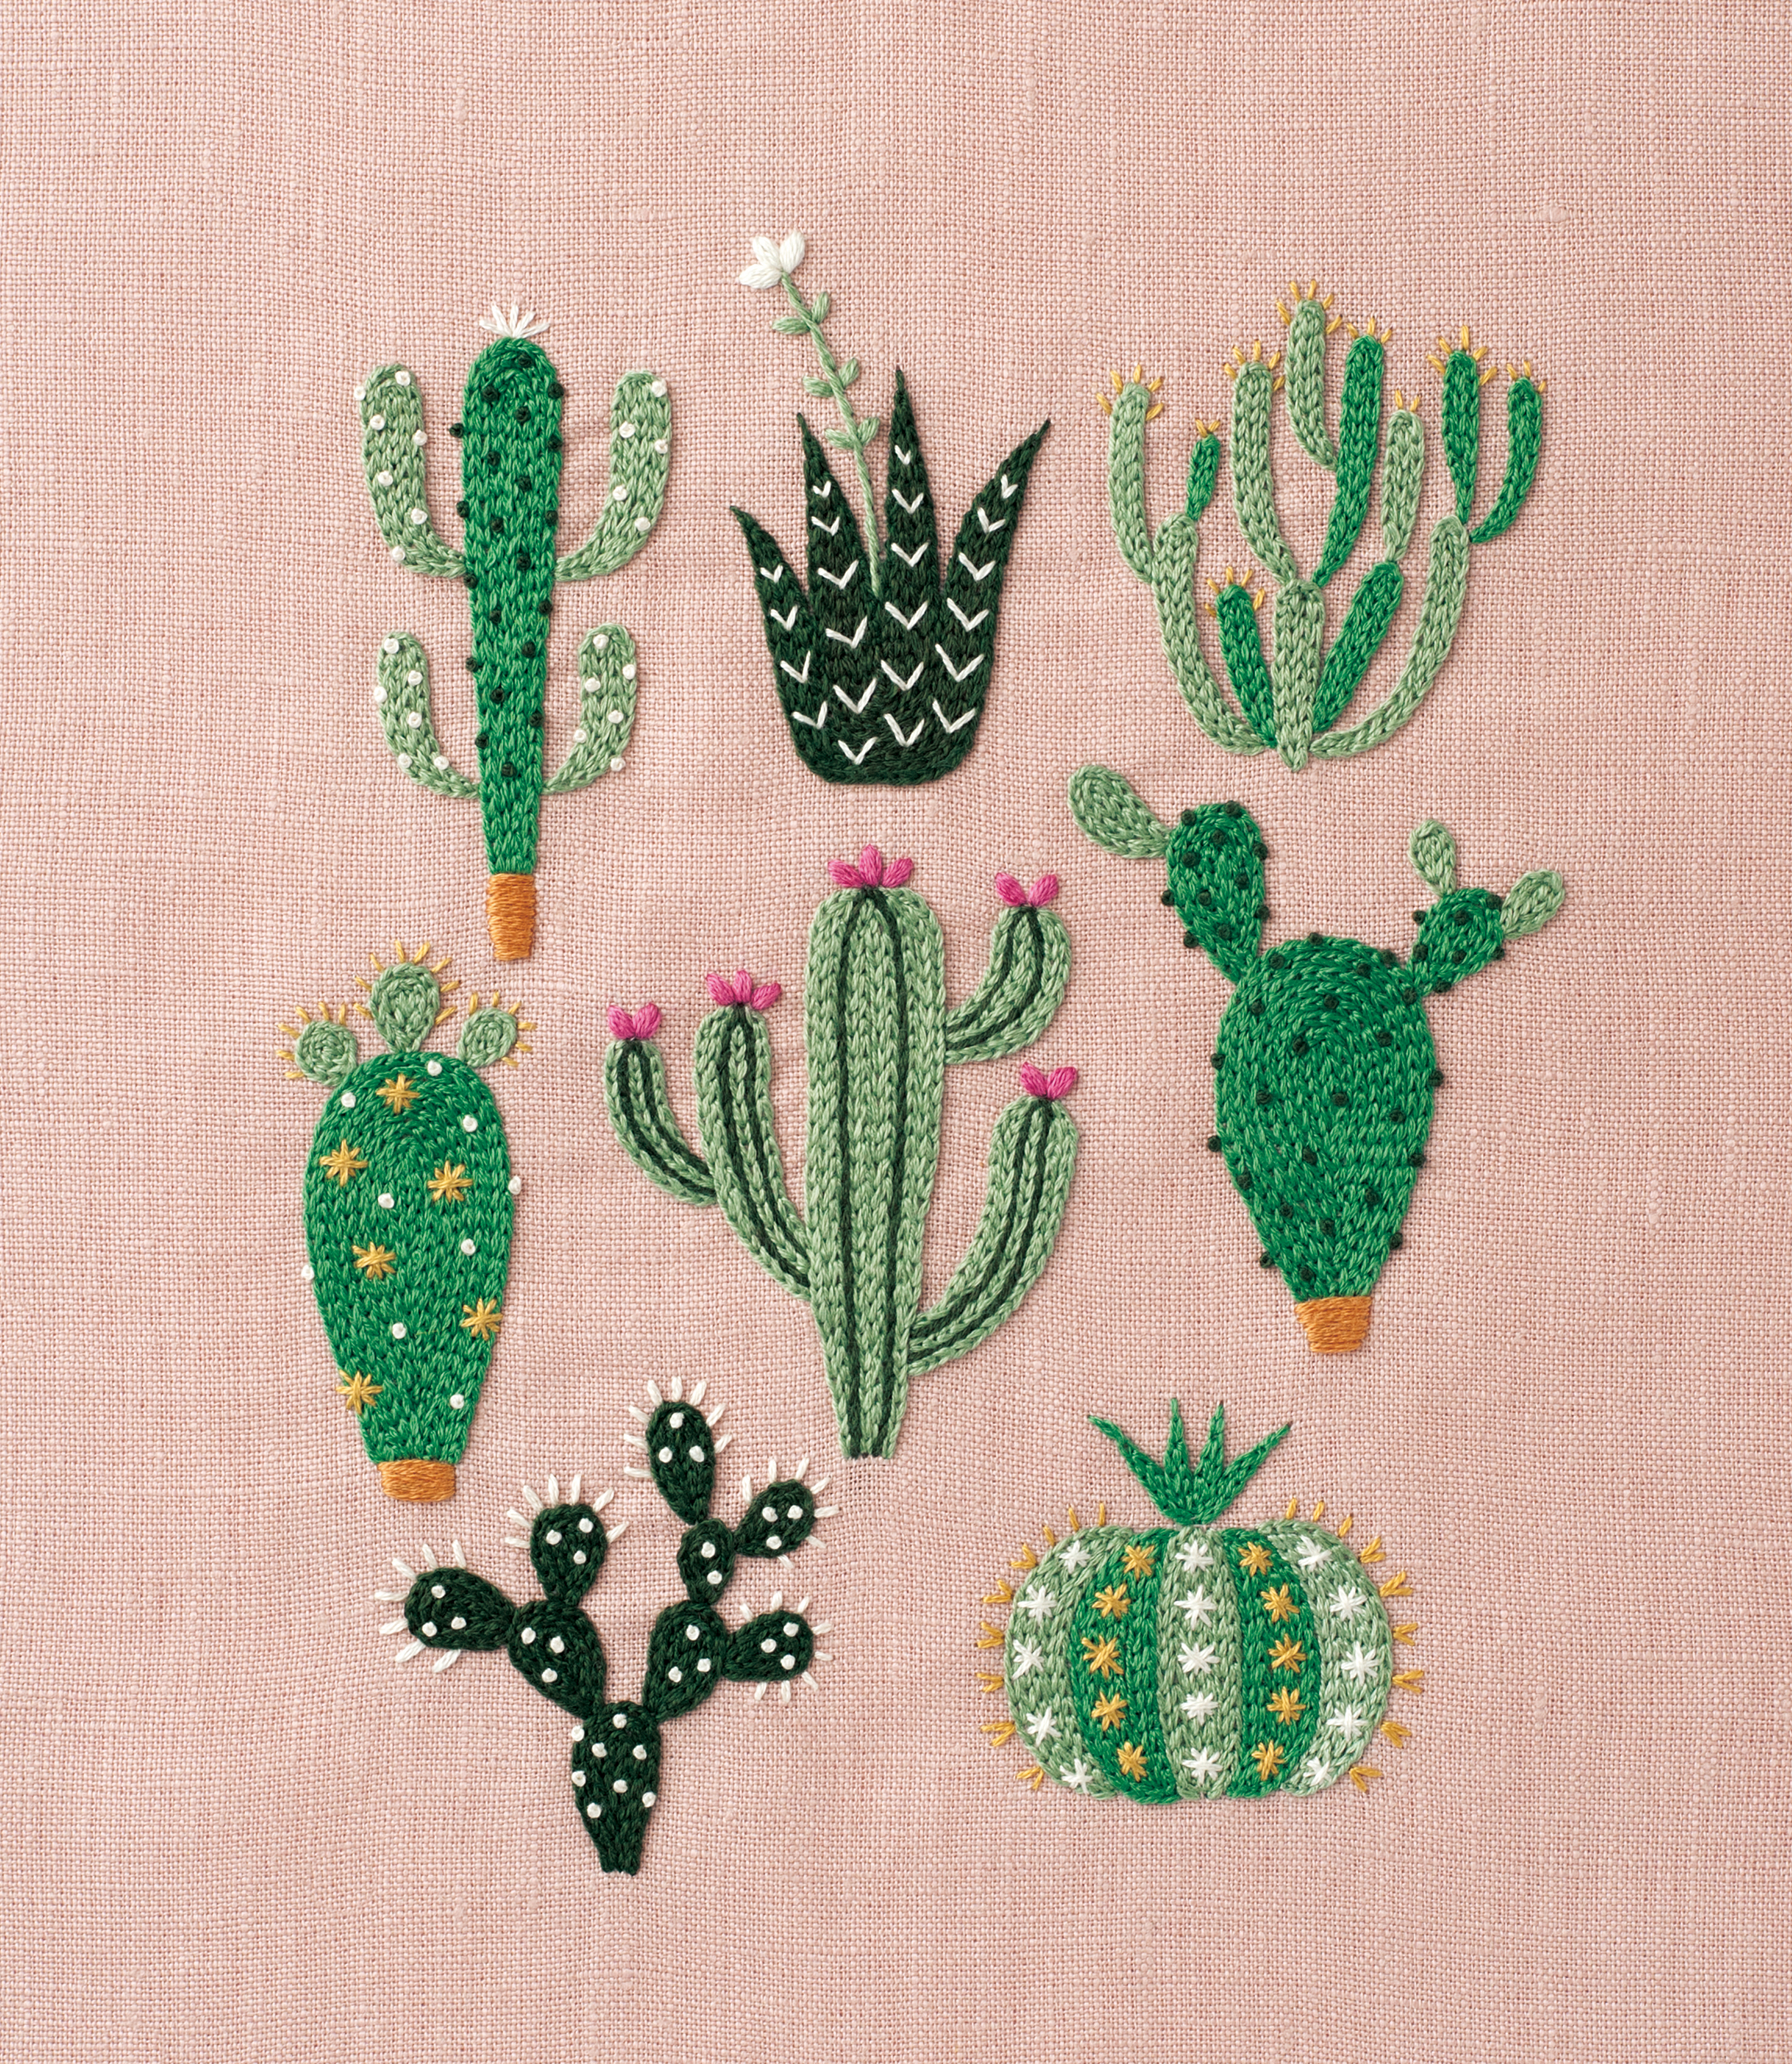 Japanese Embroidery Patterns Diy Floral Cactus Embroidery Projects From A Year Of Embroidery